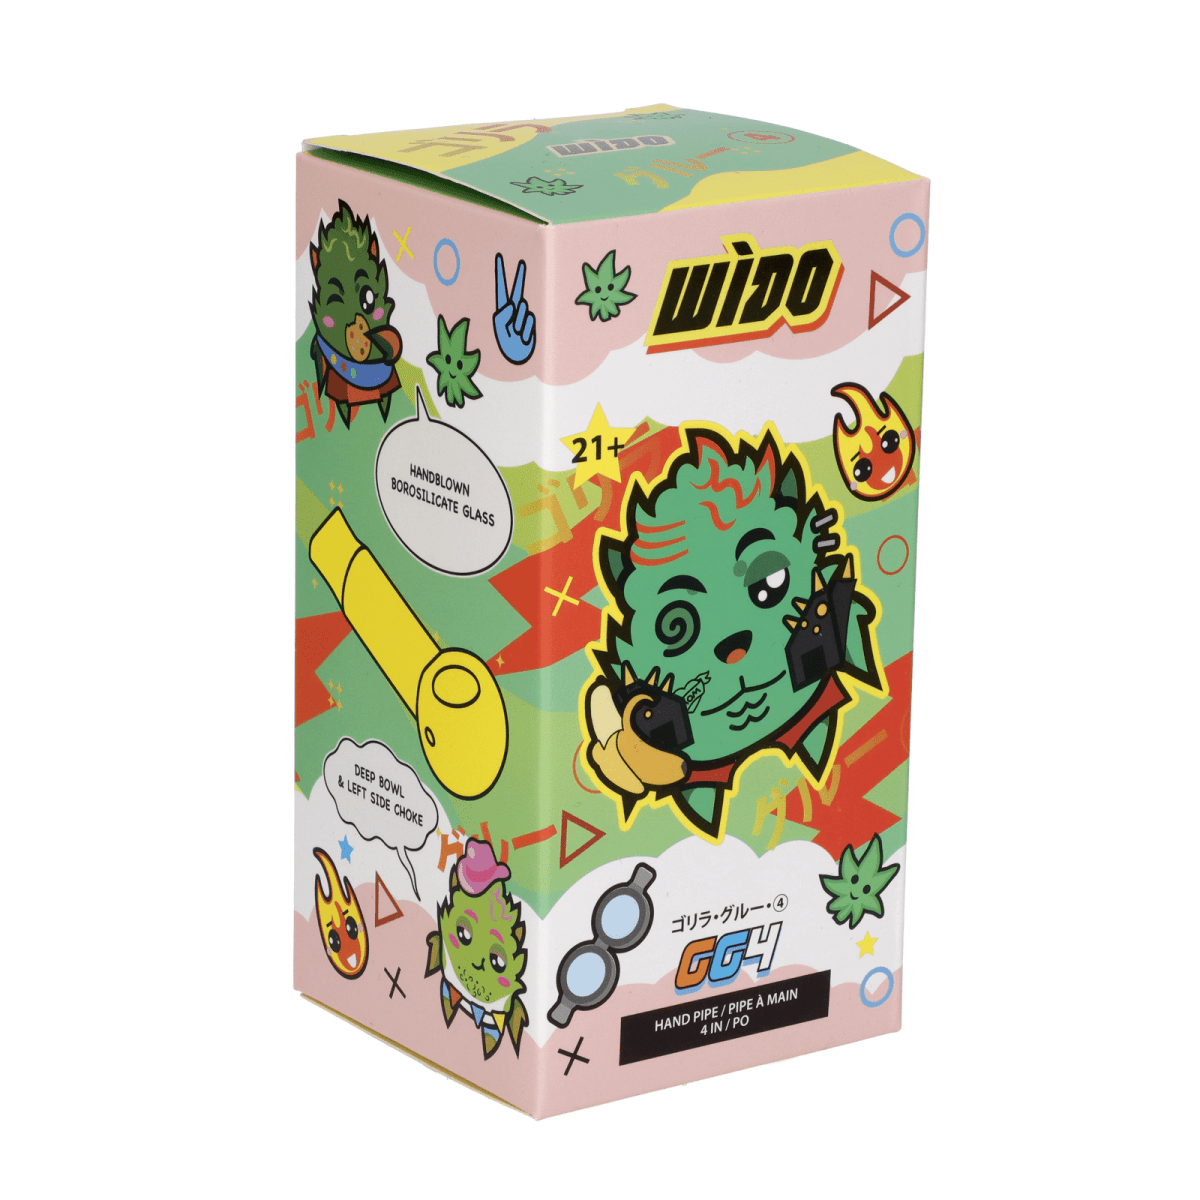 Daily High Club Box Limited Edition 420 Bunny Deluxe Box